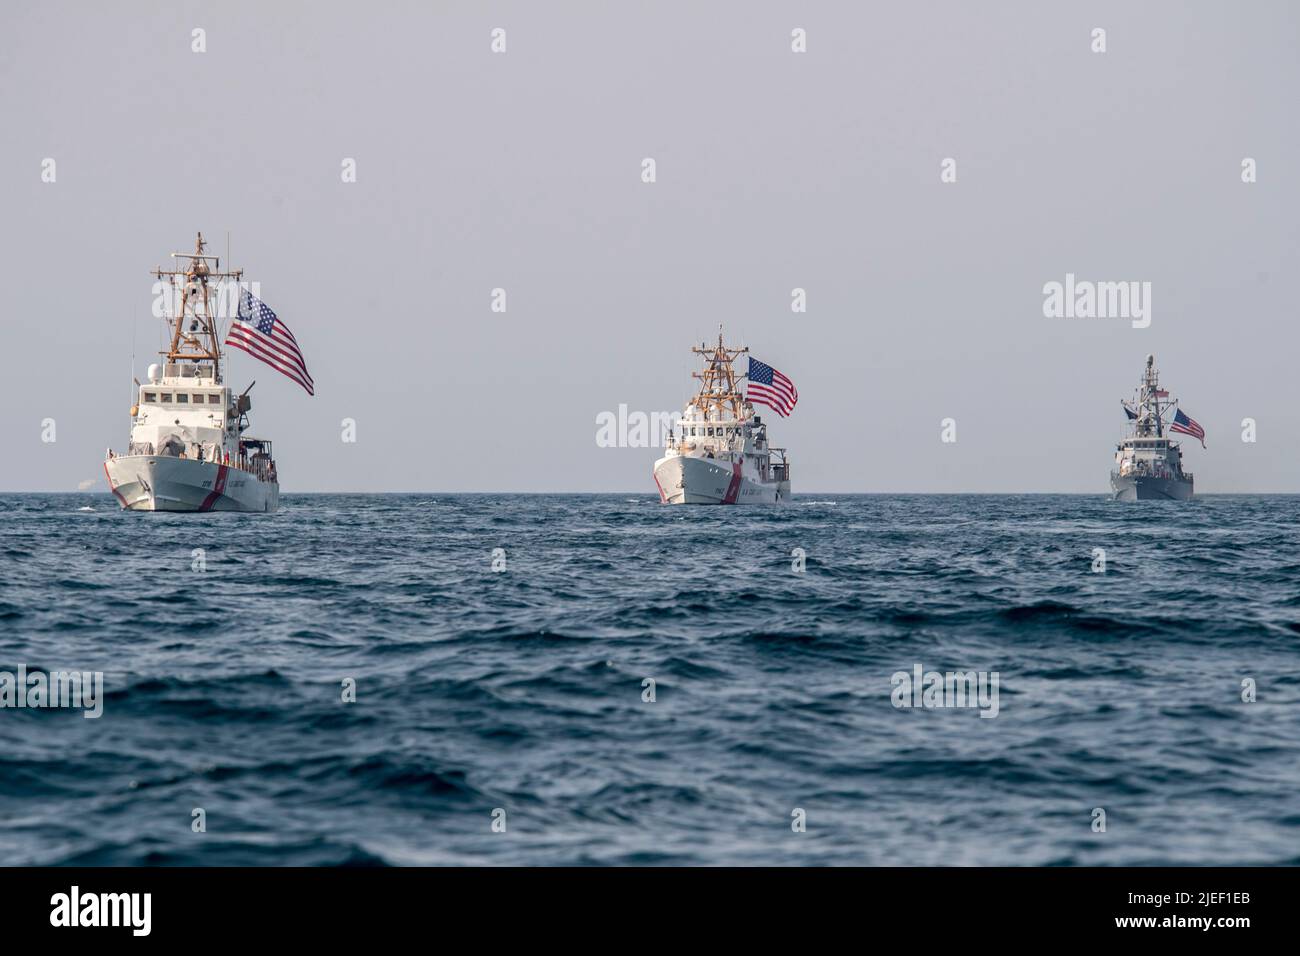 220626-N-NS602-1416 ARABIAN GULF (June 26, 2022) U.S. Coast Guard cutters USCGC Baranof (WPB 1318) and USCGC Robert Goldman (WPC 1142) and coastal patrol ship USS Thunderbolt (PC 12) sail in the Arabian Gulf, June 26. U.S. naval forces regularly operate across the Middle East region to help ensure security and stability. (U.S. Navy photo by Chief Mass Communication Specialist Roland A. Franklin) Stock Photo